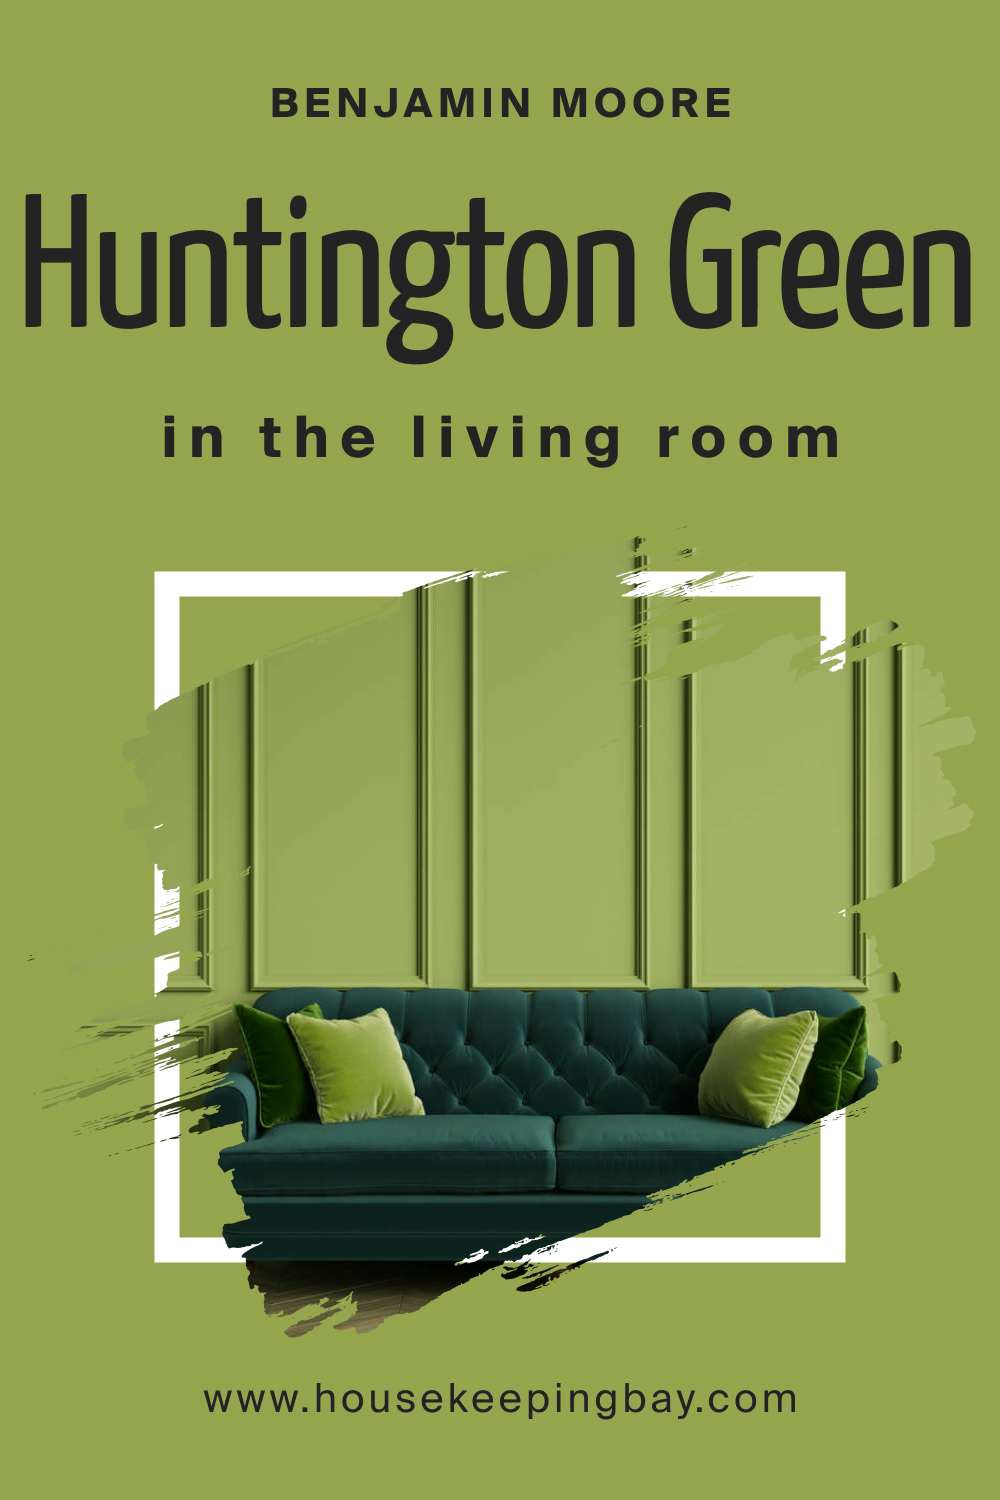 How to Use Huntington Green 406 in the Living Room?